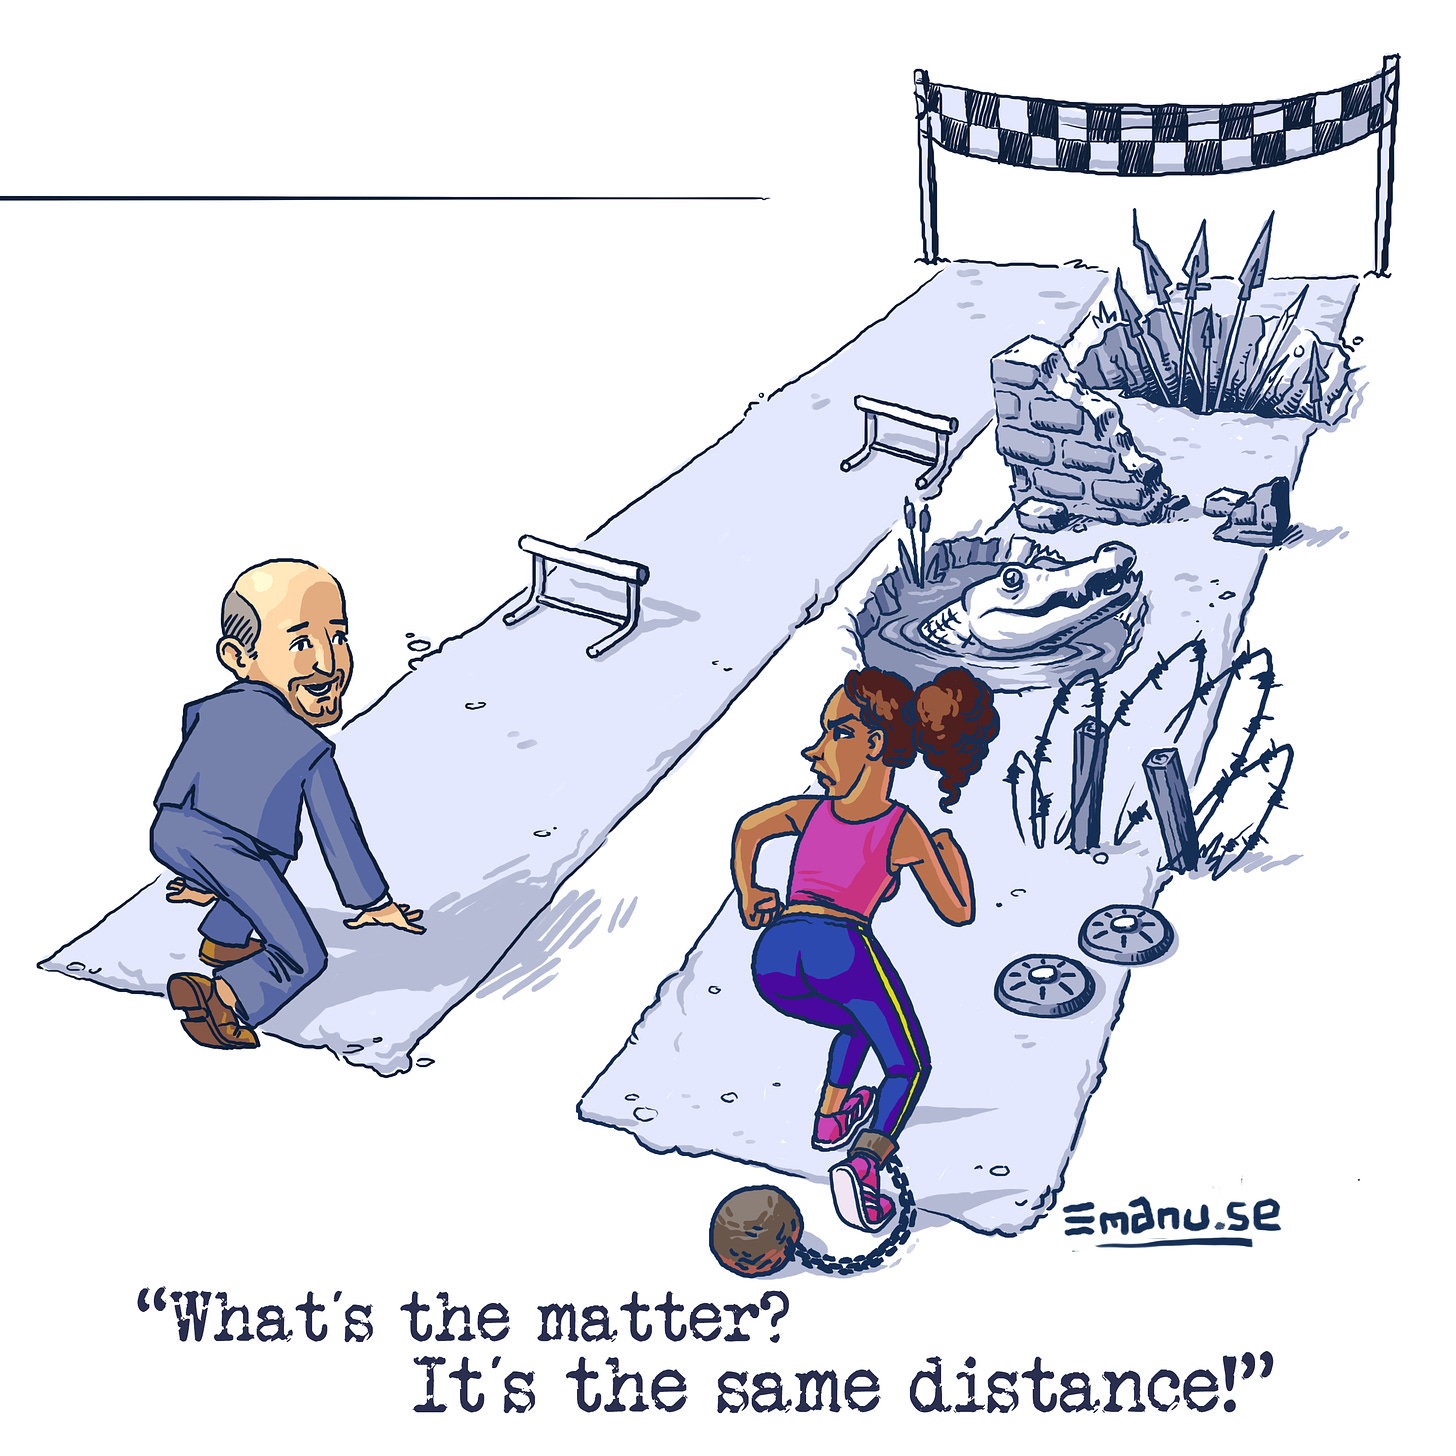 A cartoon of a white man and a Black woman lining up to race. The Black woman’s track is littered with barbed wire alligators and other barriers, while the white man’s is clear. The caption reads “What’s the matter? It’s the same distance!”